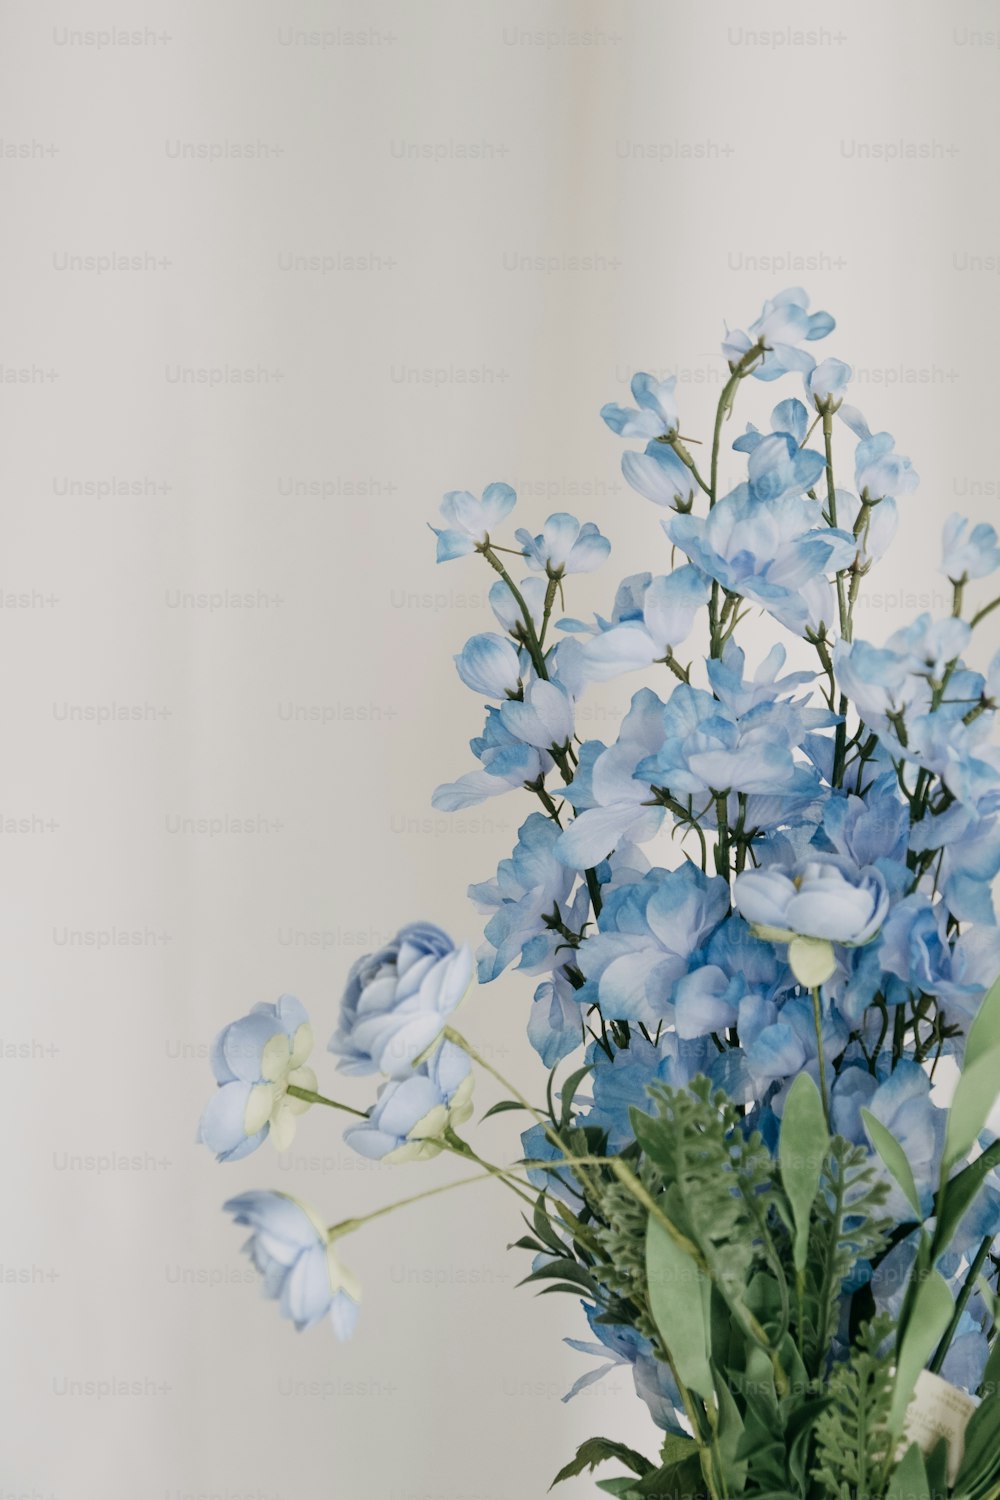 a vase filled with blue flowers on top of a table